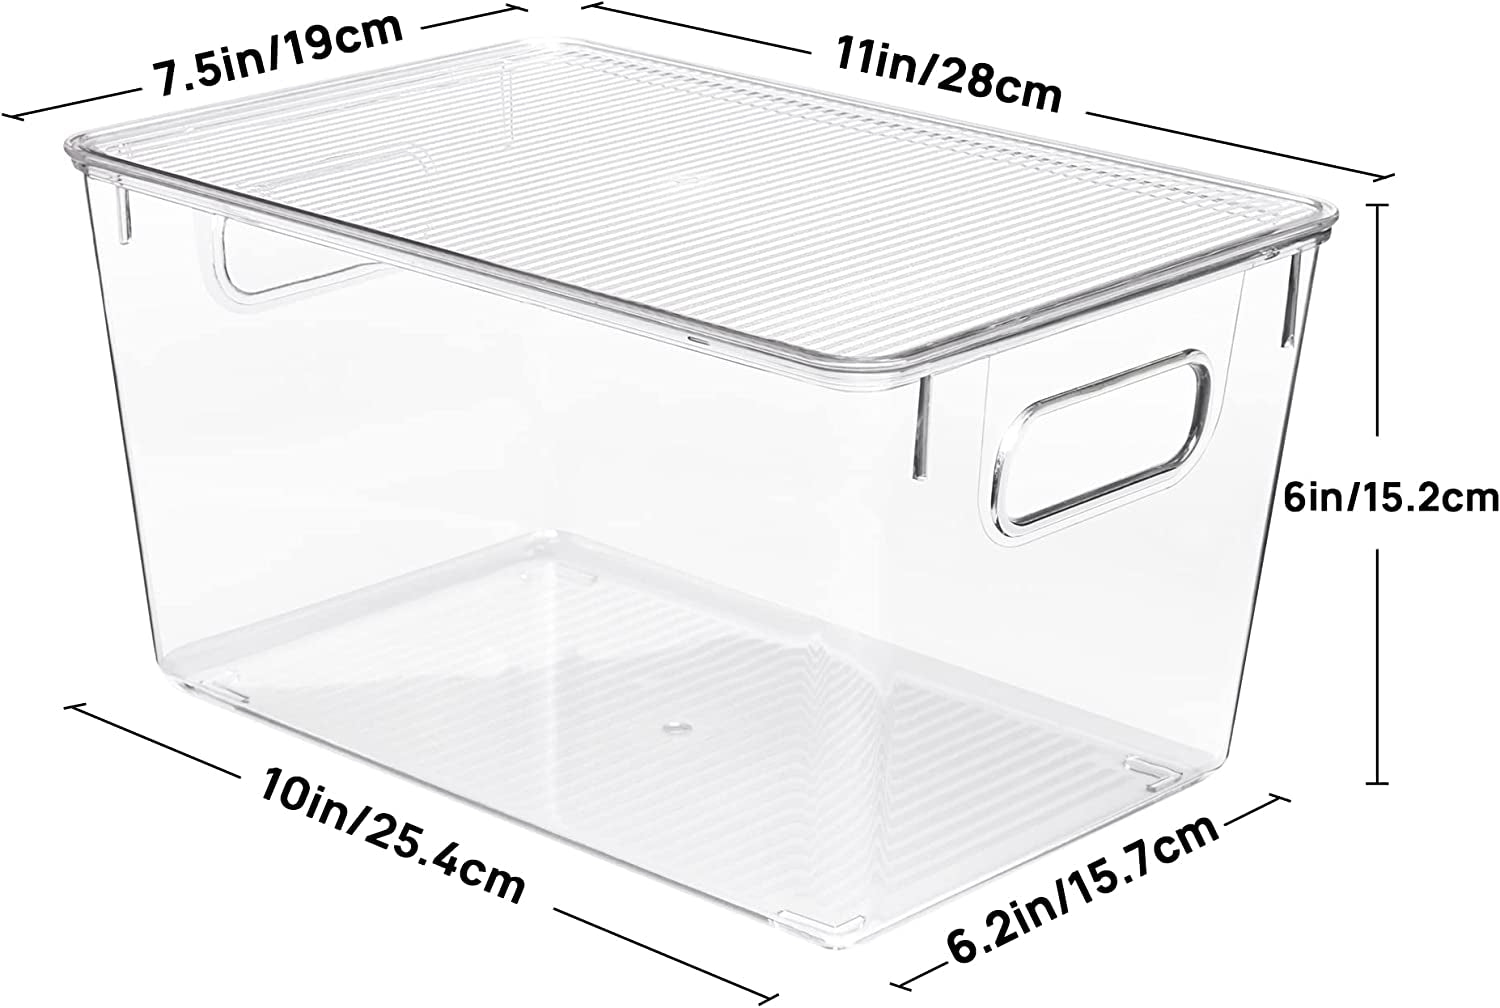 6 Pack Clear Stackable Storage Bins with Lids, Large Plastic Containers with Handle for Pantry Organization and Storage,Perfect for Kitchen, Fridge, Cabinet, Bathroom Organizer